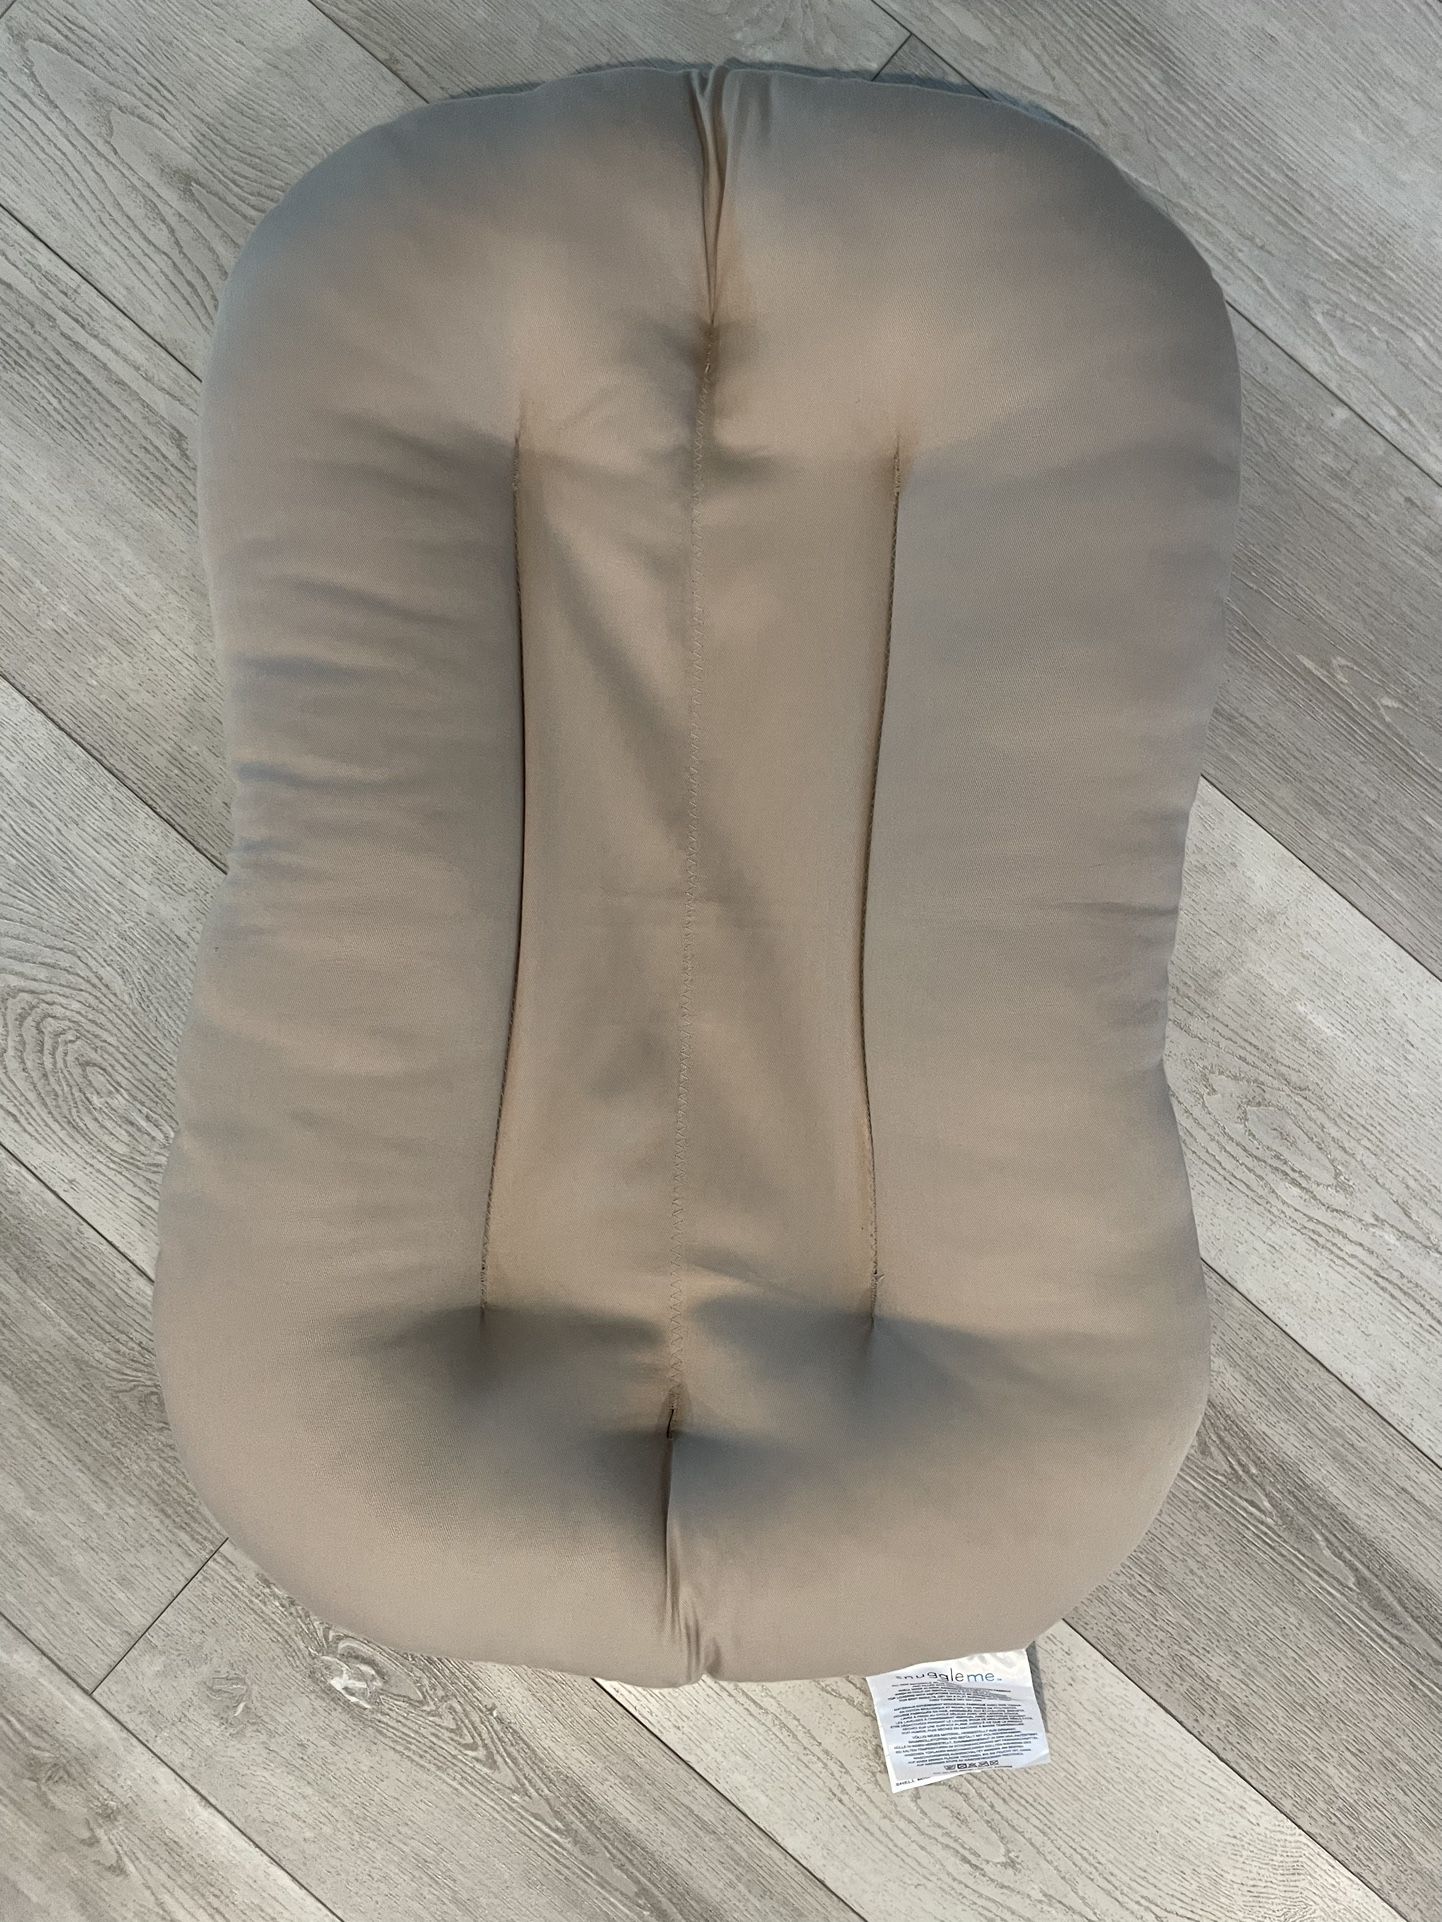 Snuggle Me Infant Lounger & Cover